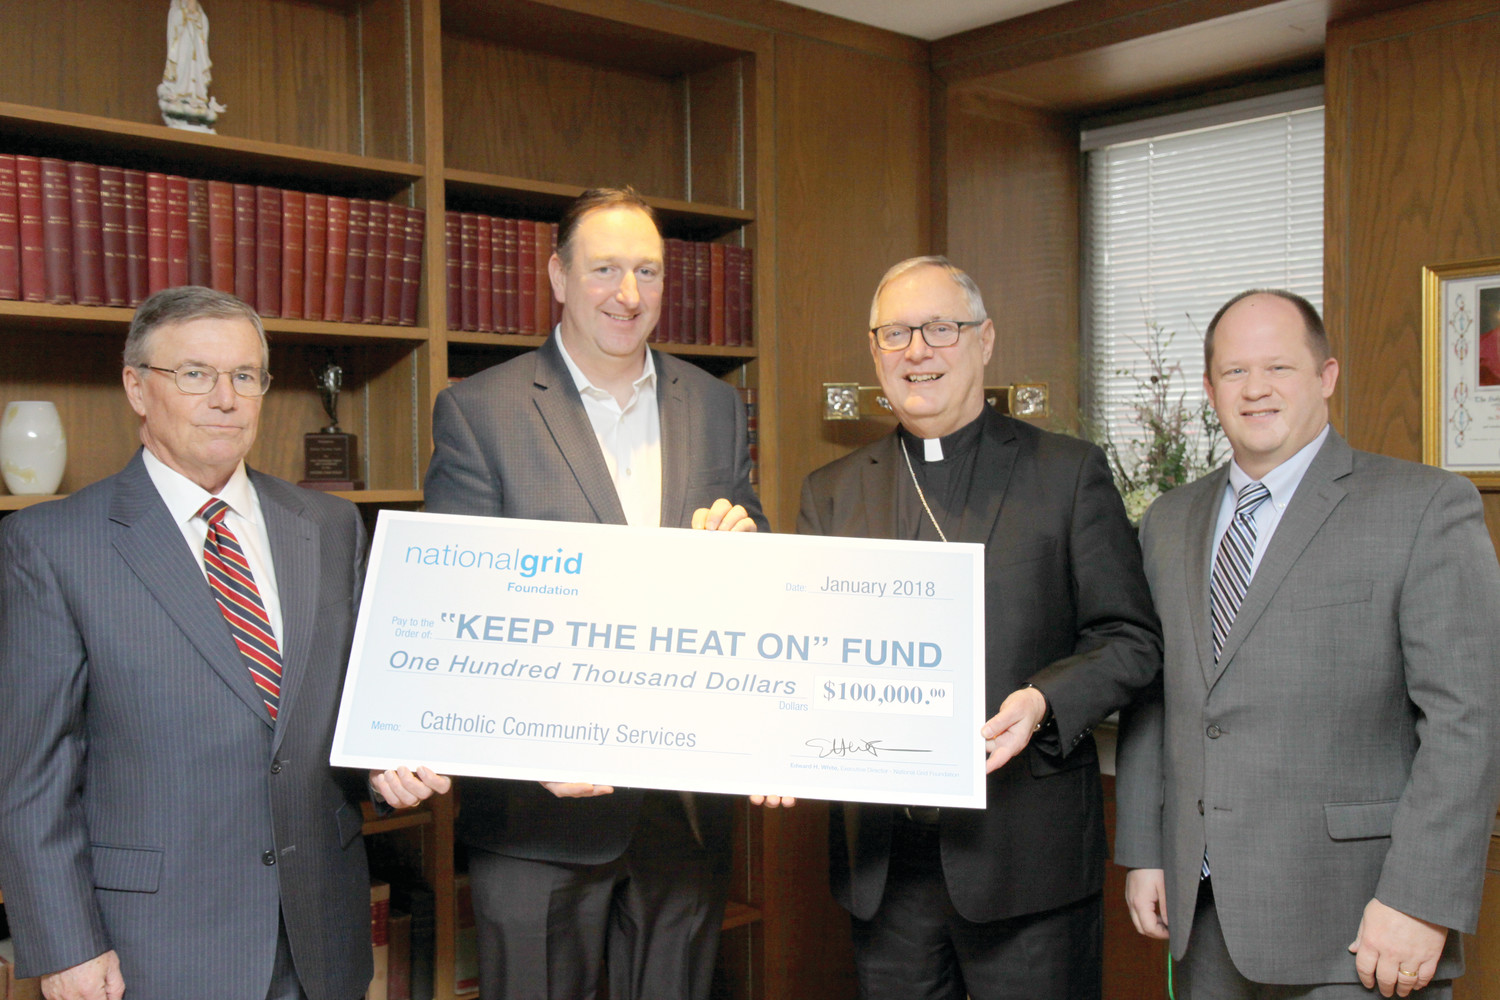 From left, Michael Ryan, director of government affairs for National Grid Rhode Island, and Ed White, executive director of the National Grid Foundation, present Bishop Thomas J. Tobin and James Jahnz, emergency assistance network coordinator for the diocese, with a $100,000 donation to the “Keep the Heat On” program.